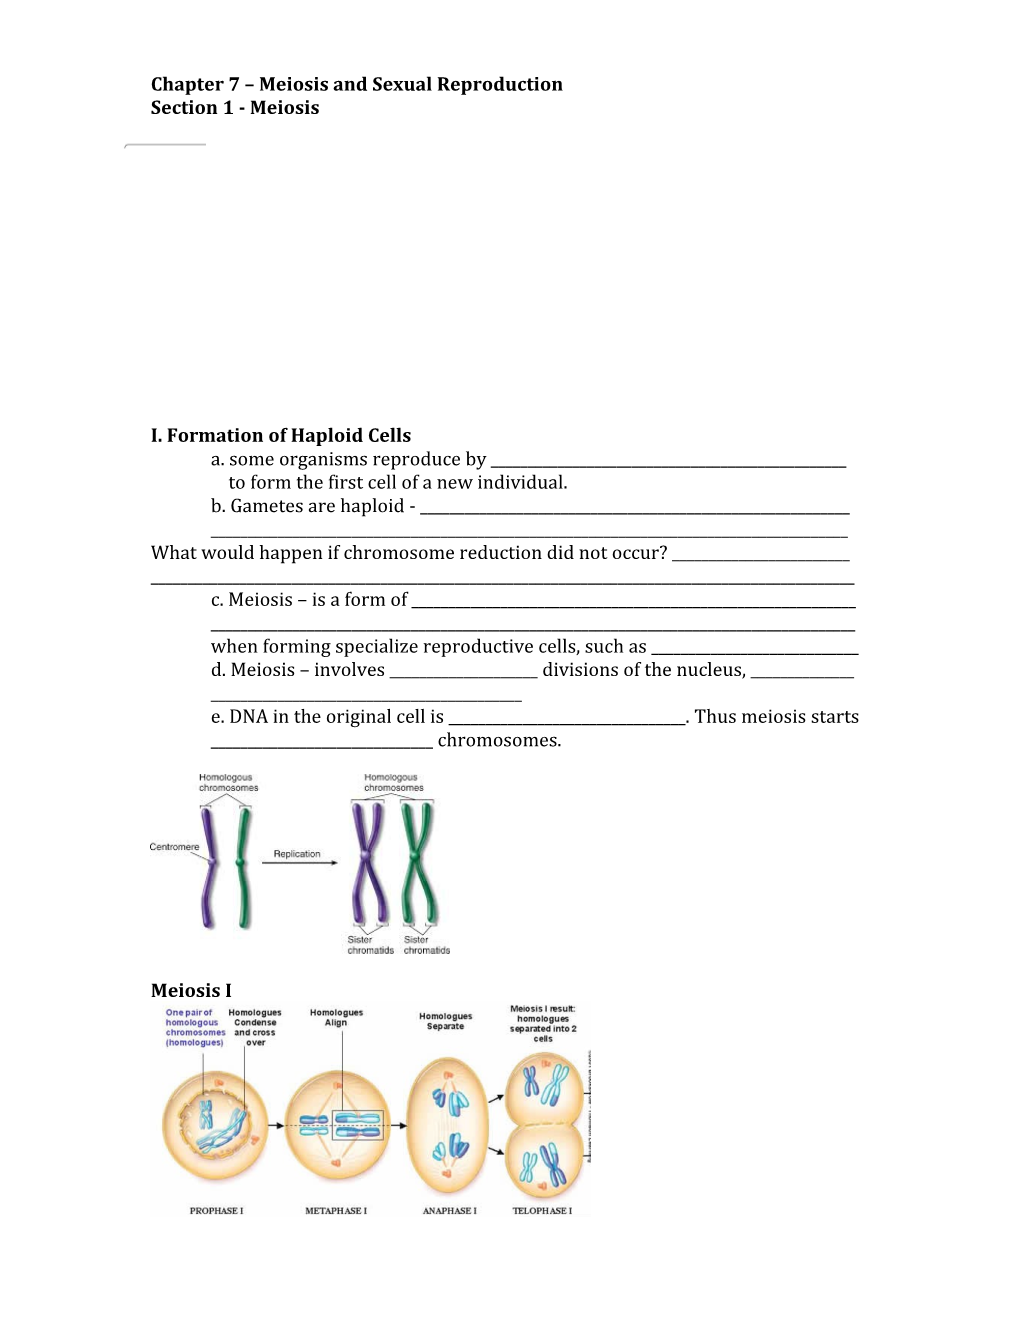 Chapter 7 Meiosis and Sexual Reproduction